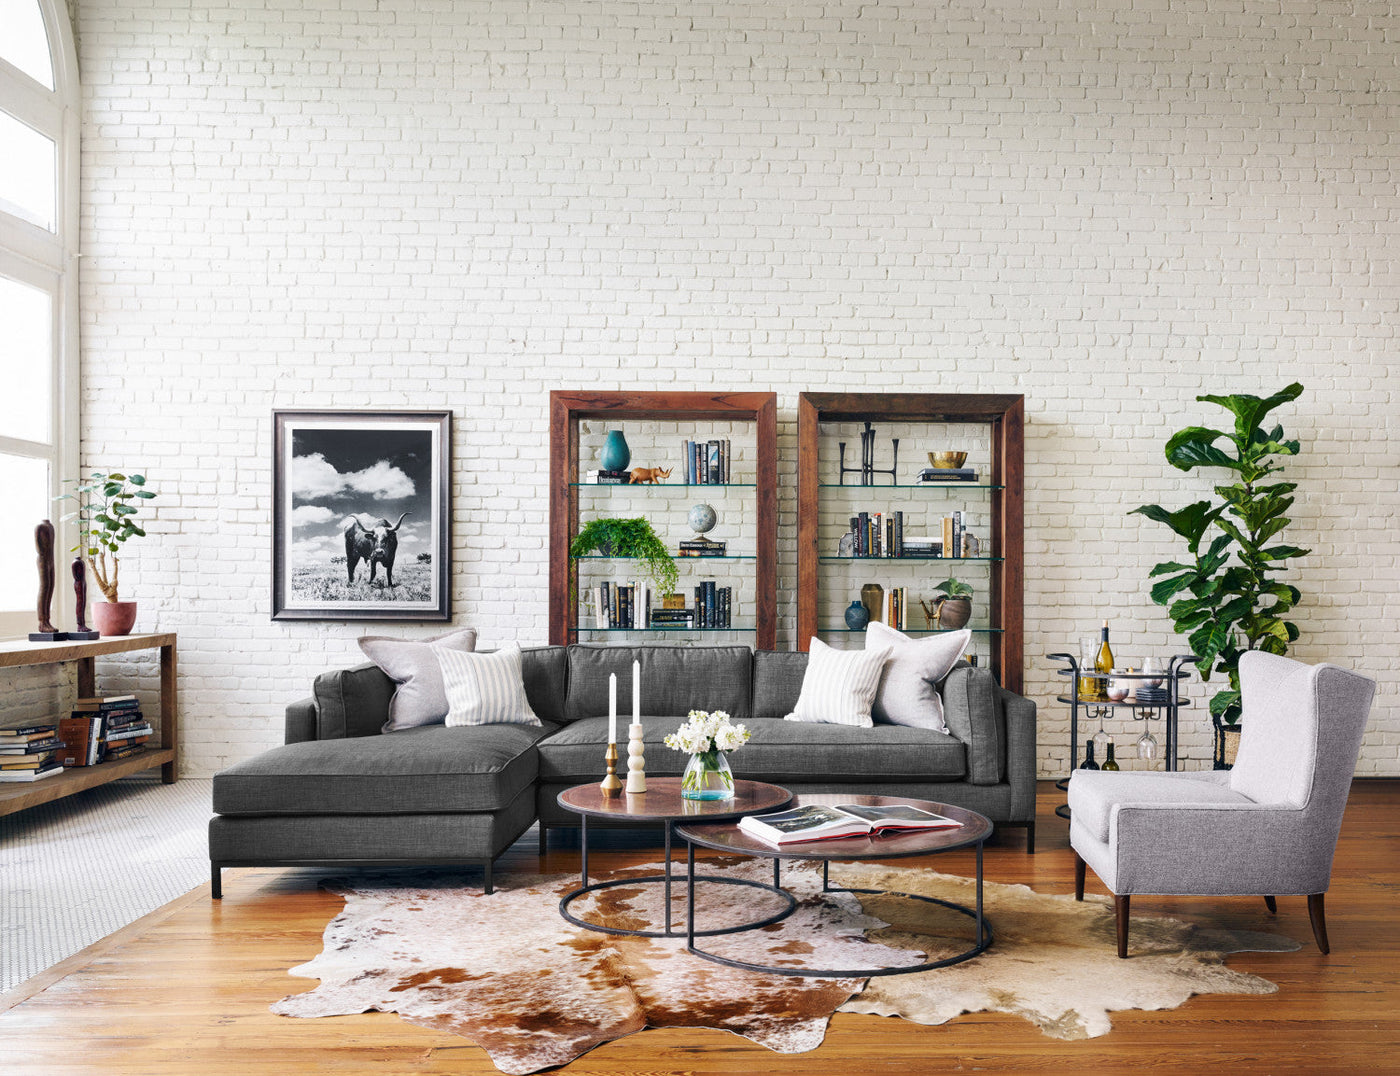 Grant Sectional Sofa with LEFT Chaise - Charcoal